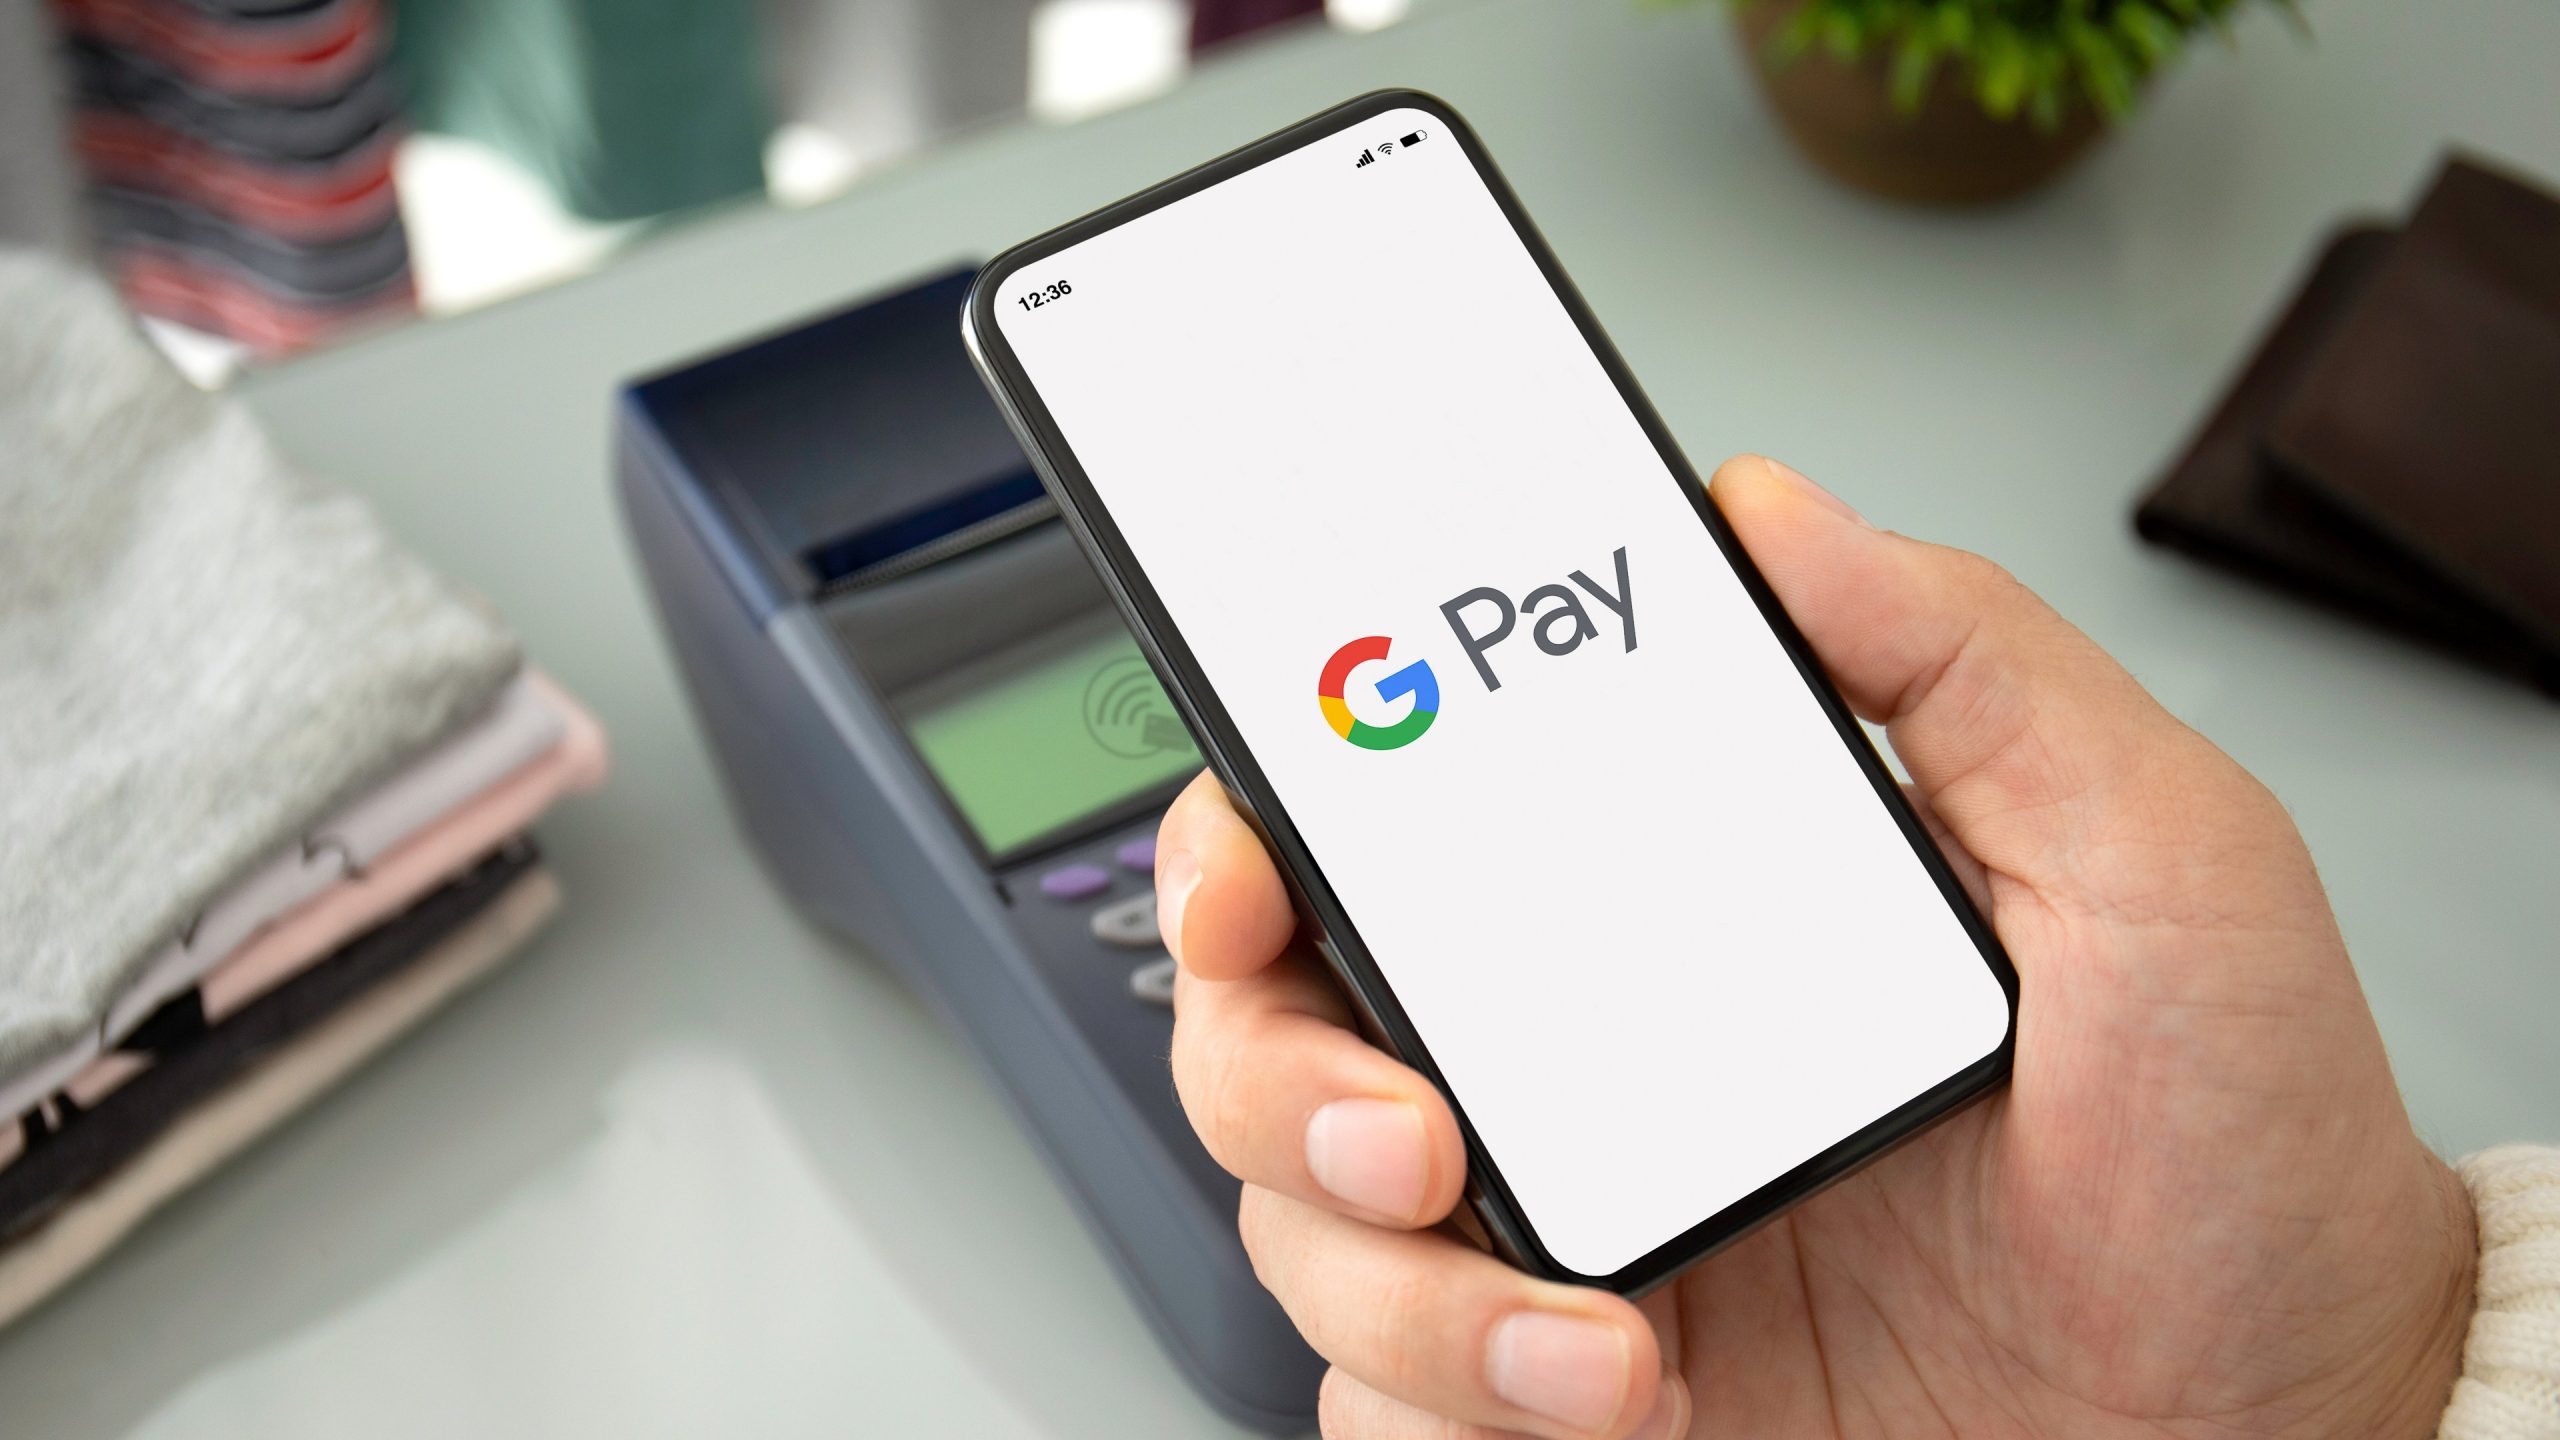 Google Pay Introduces SoundPod For Small Merchants In India